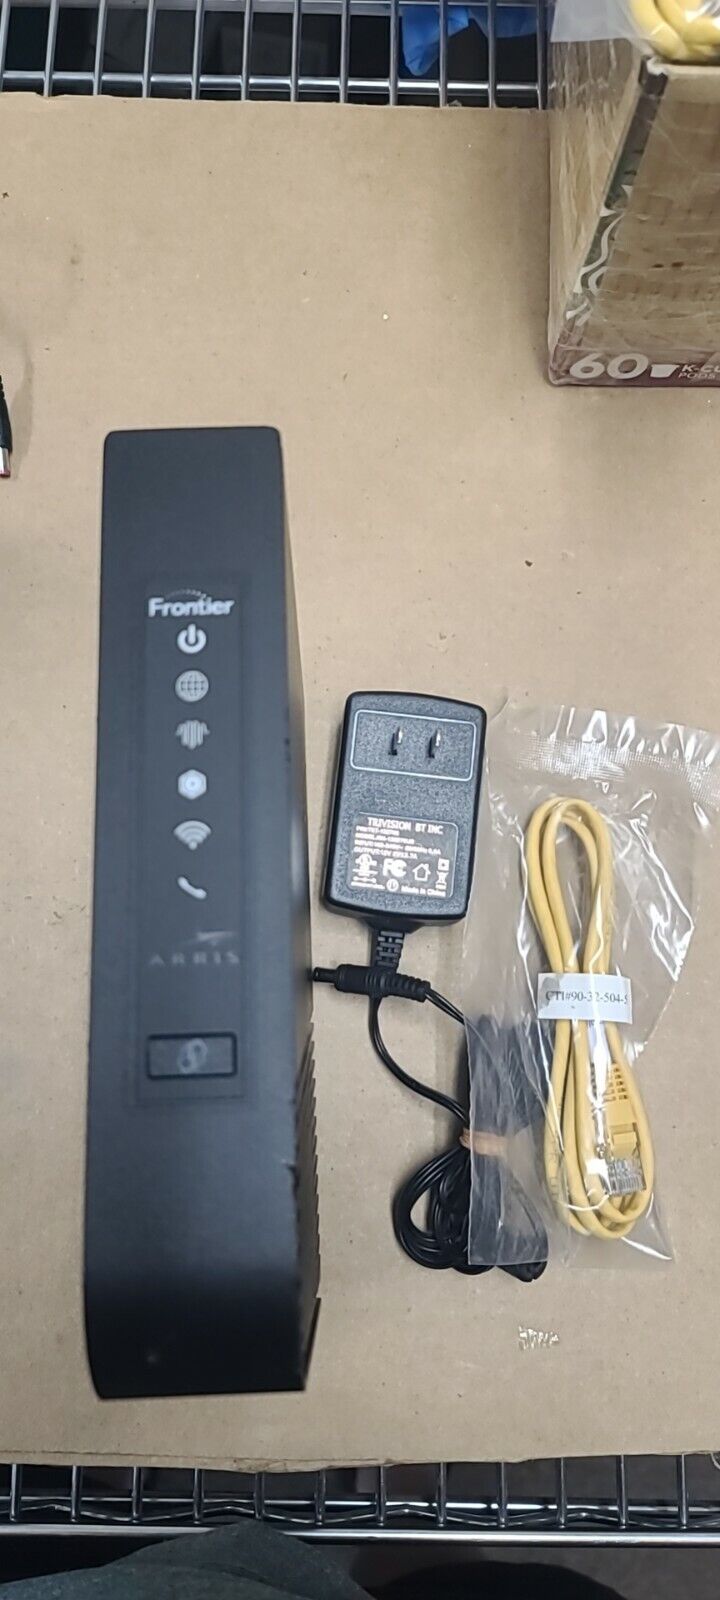 Arris Frontier Ethernet Gateway Wi-Fi Modem Router NVG468MQ with adapter/Cat5